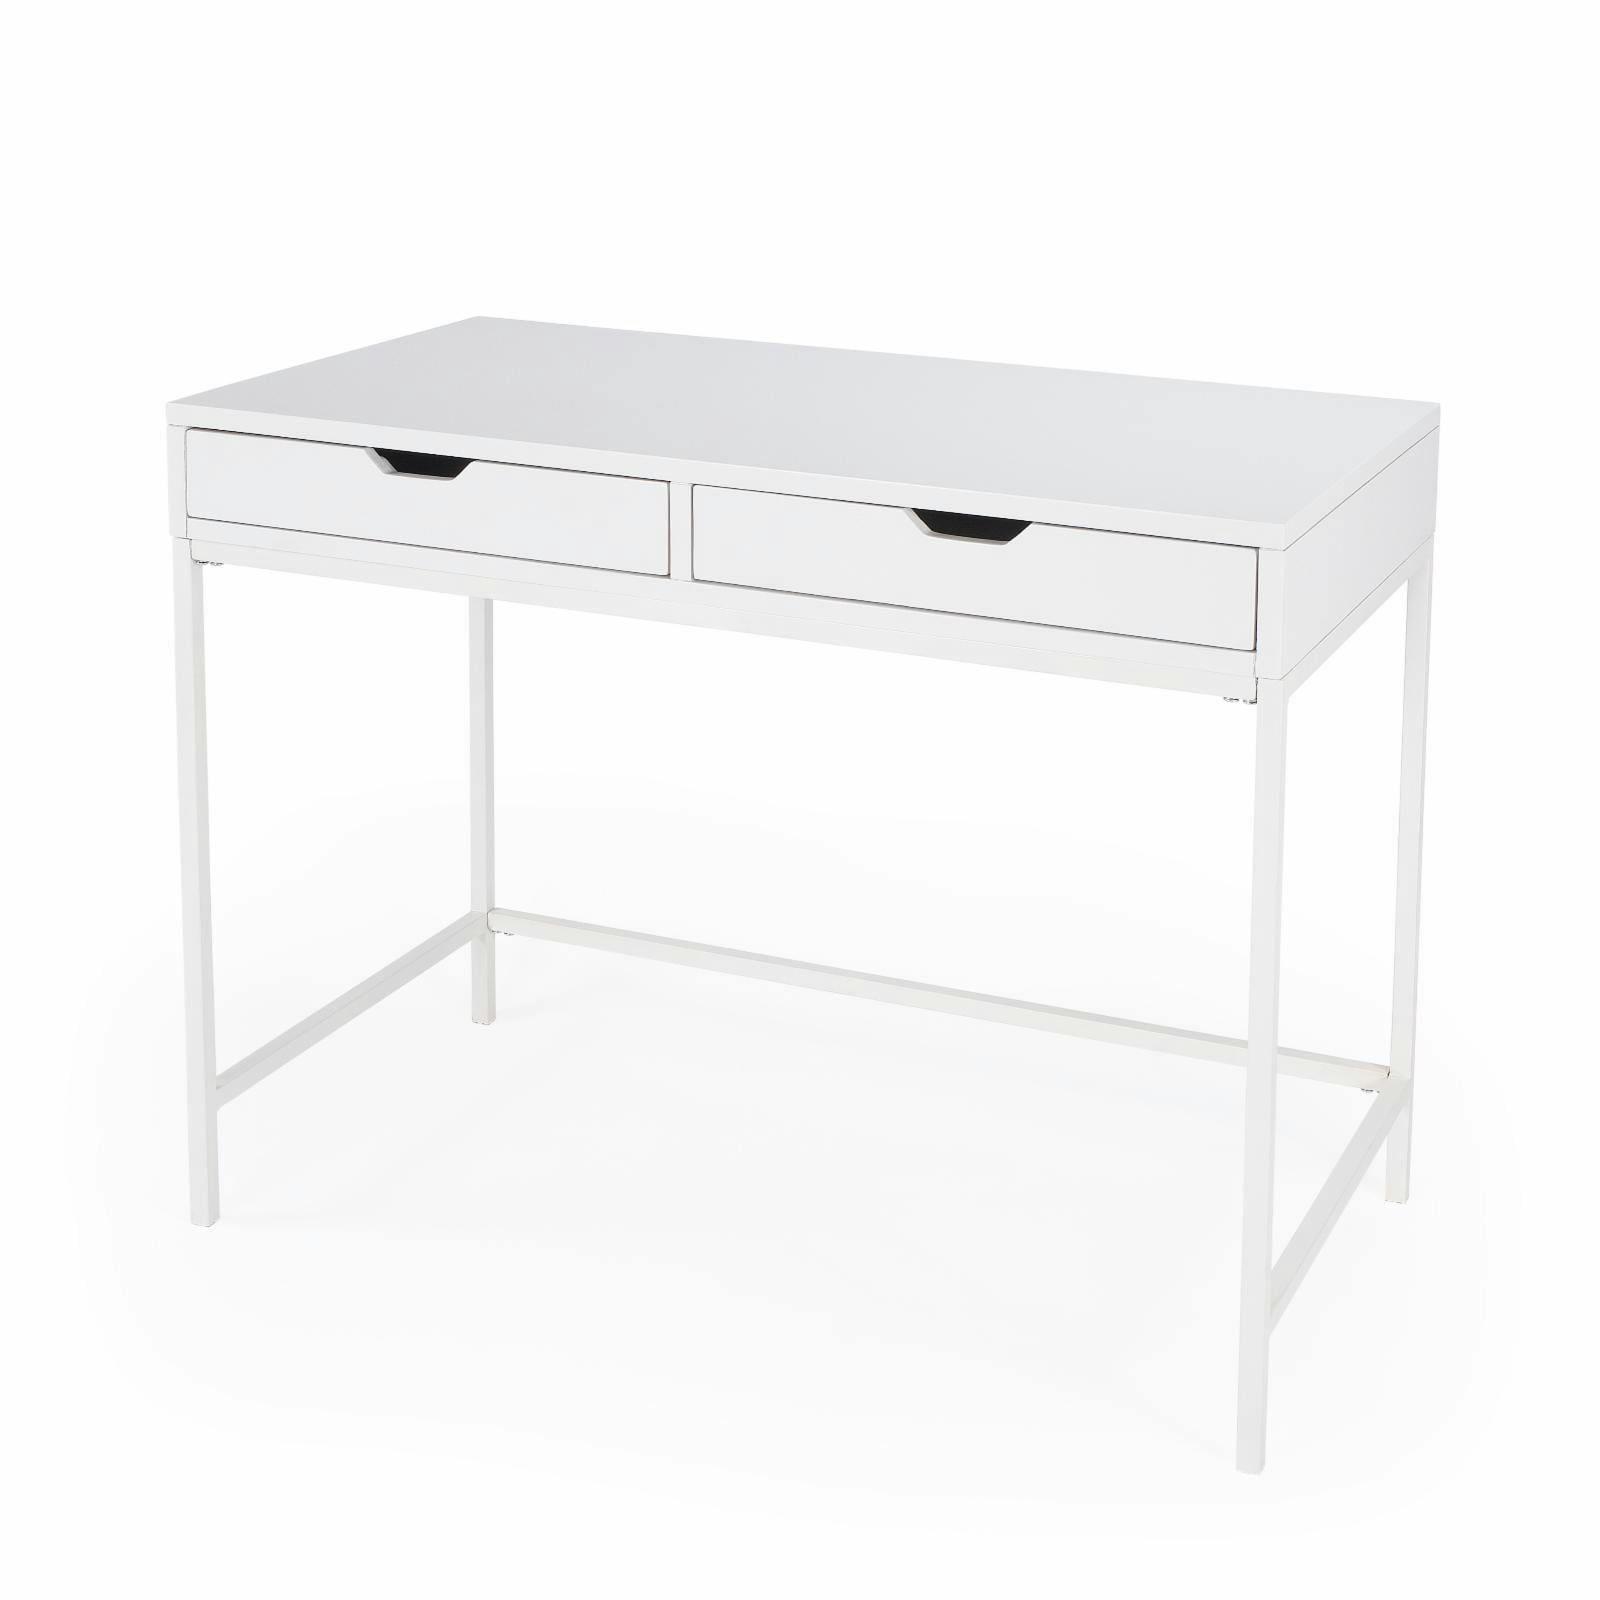 Belka Modern White Mahogany Writing Desk with Smooth Drawers